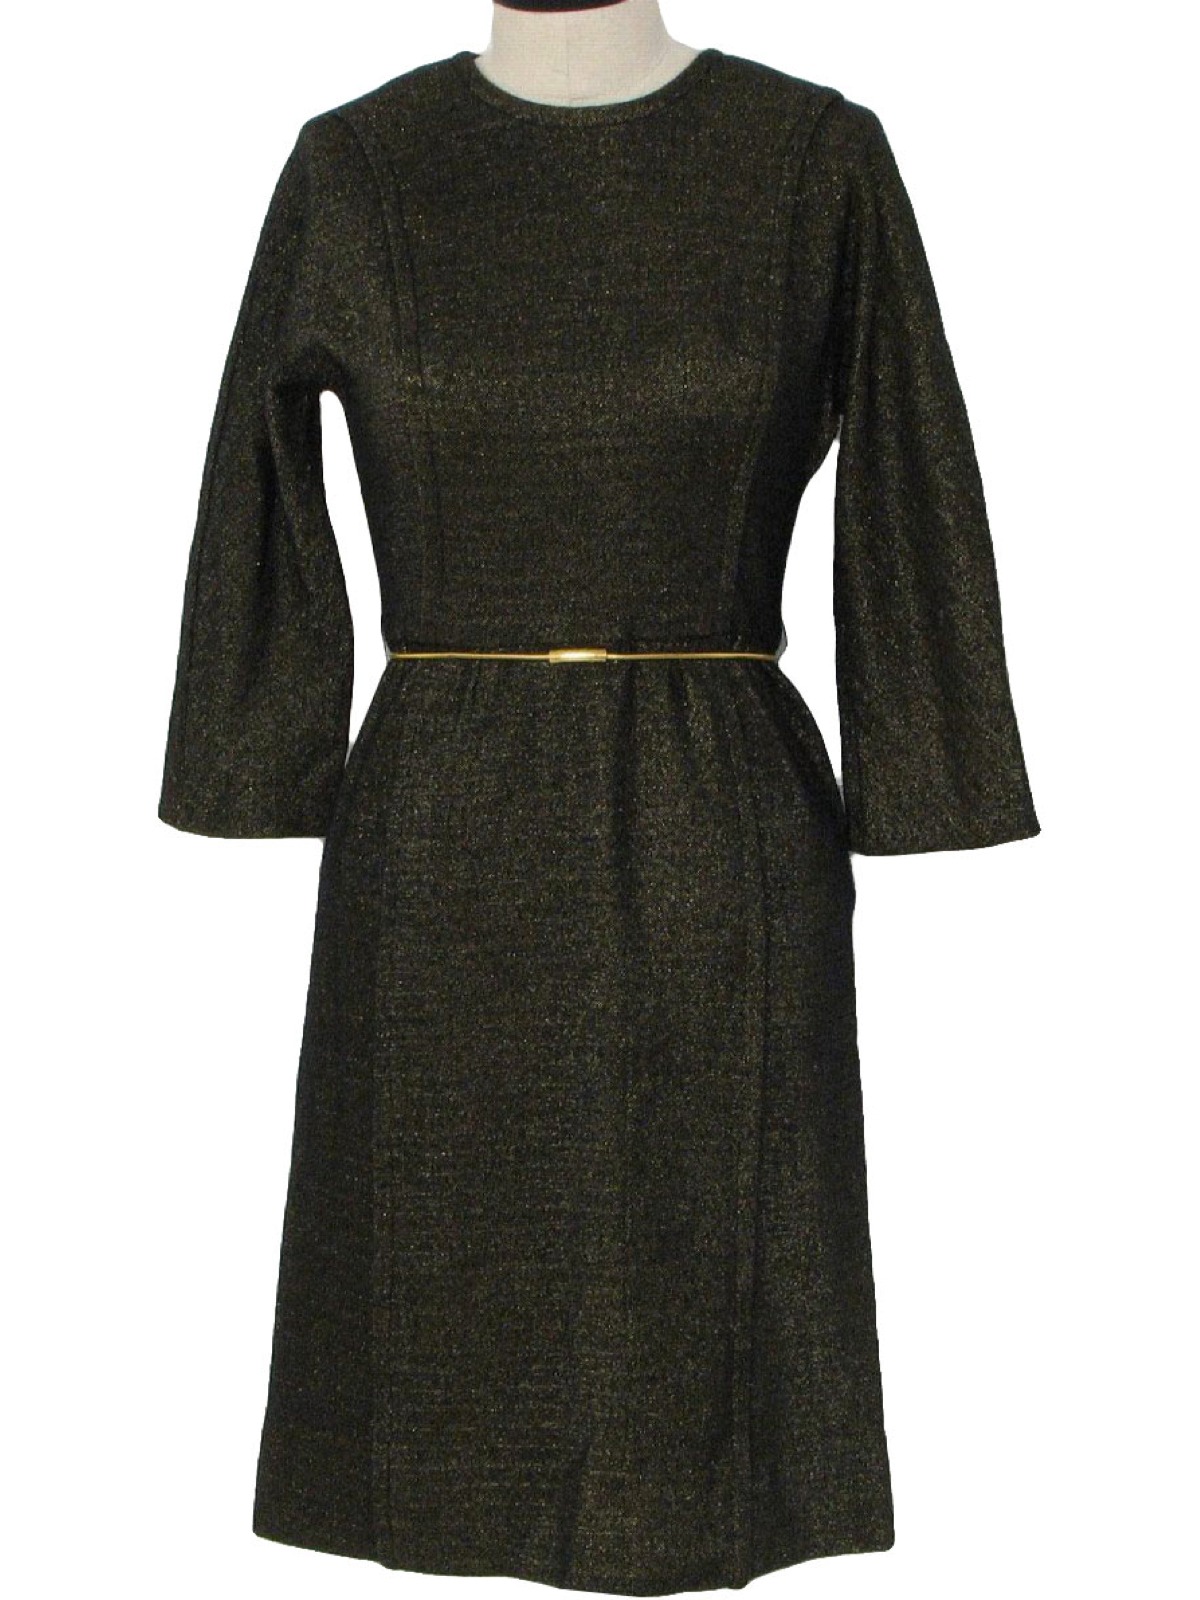 dress 70s no label womens blended black dark brown and metallic gold ...